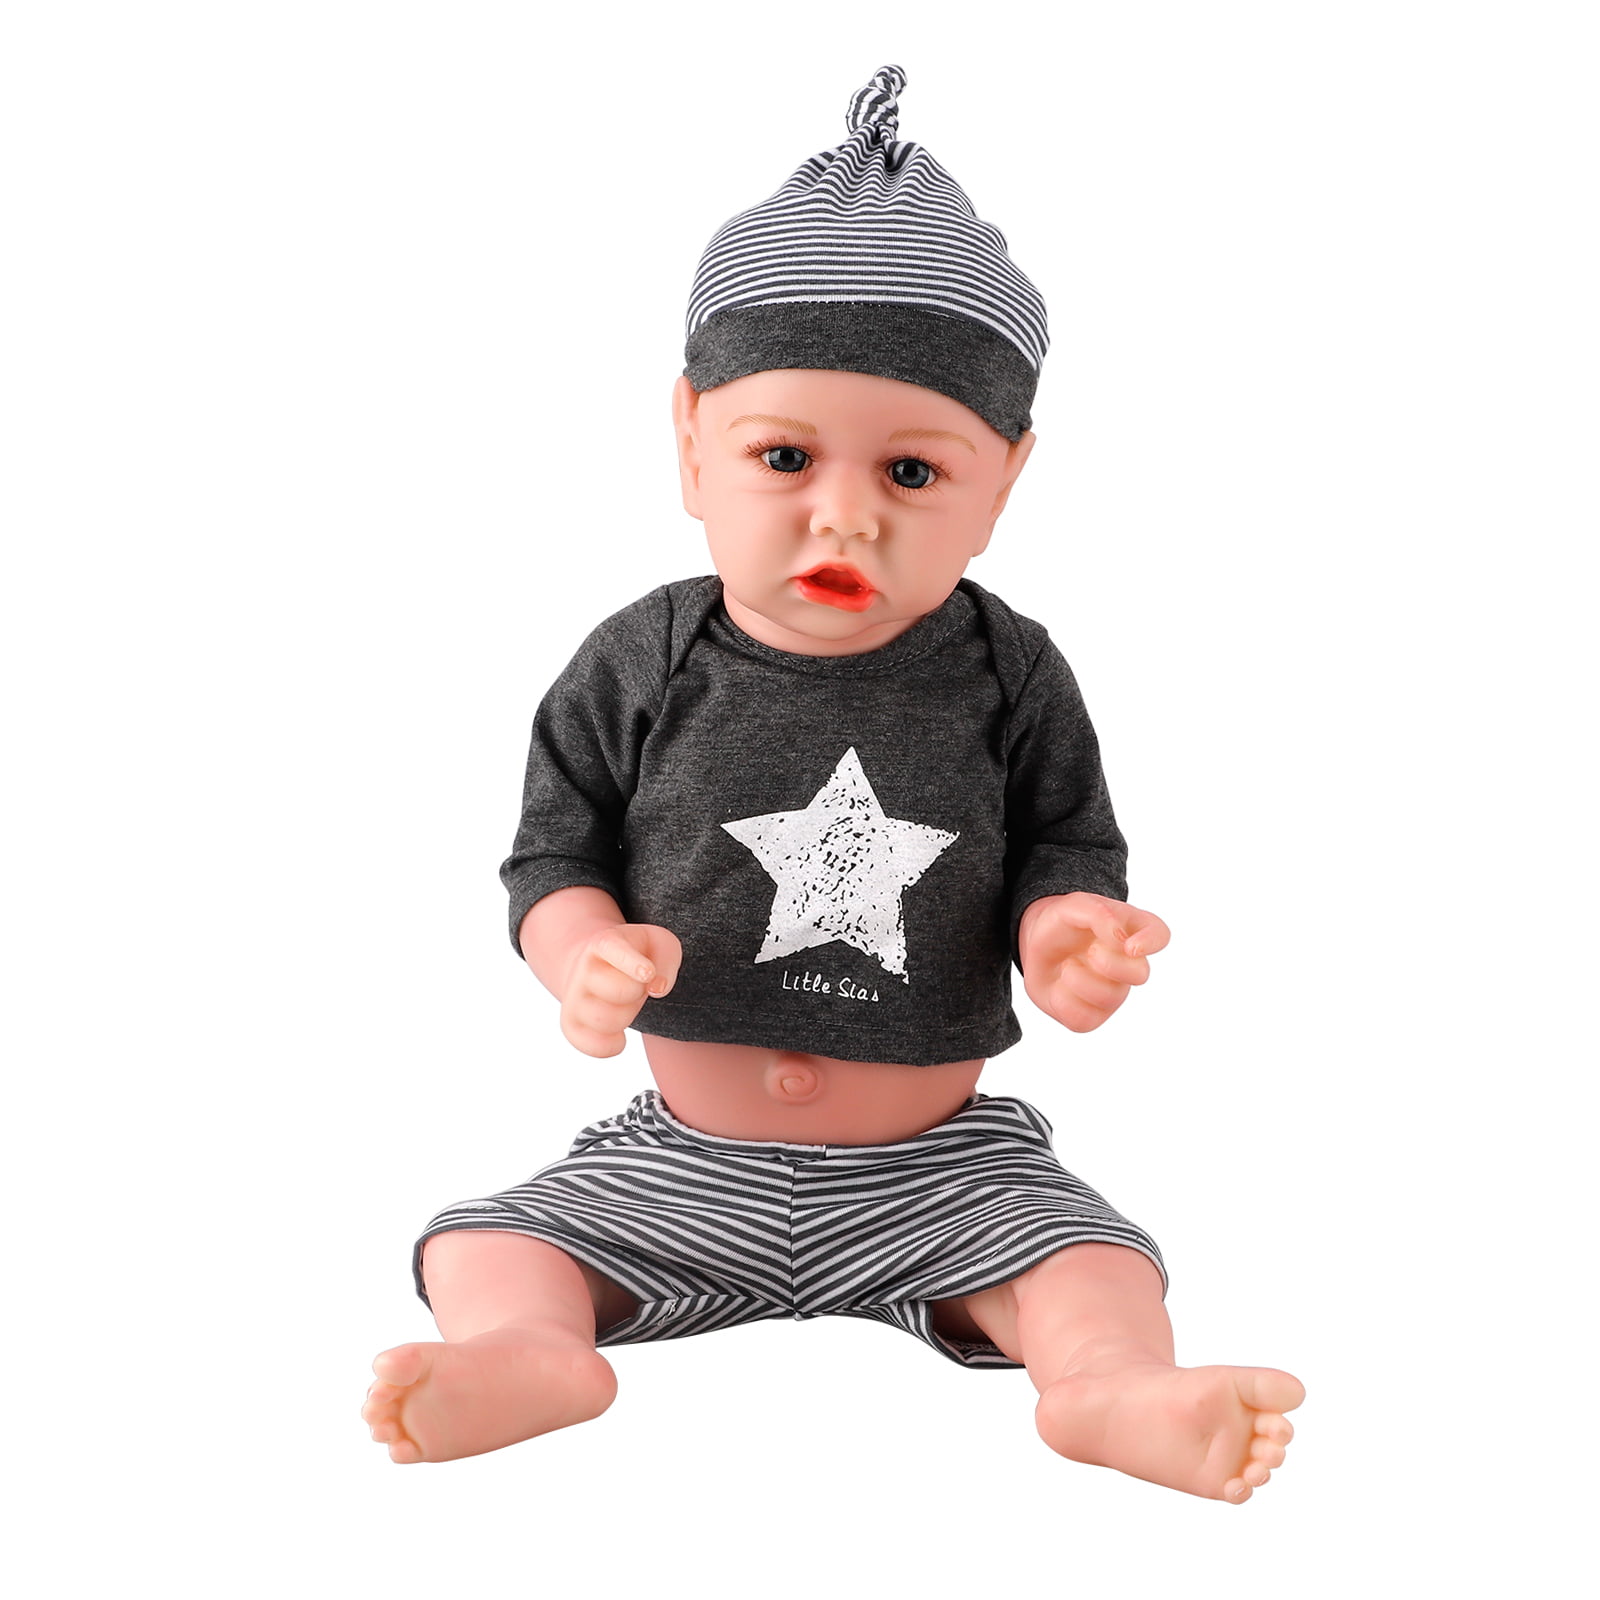 22" Reborn Toddler Boy Doll Lovely Soft Silicone Baby Real Looks Children's Wear 